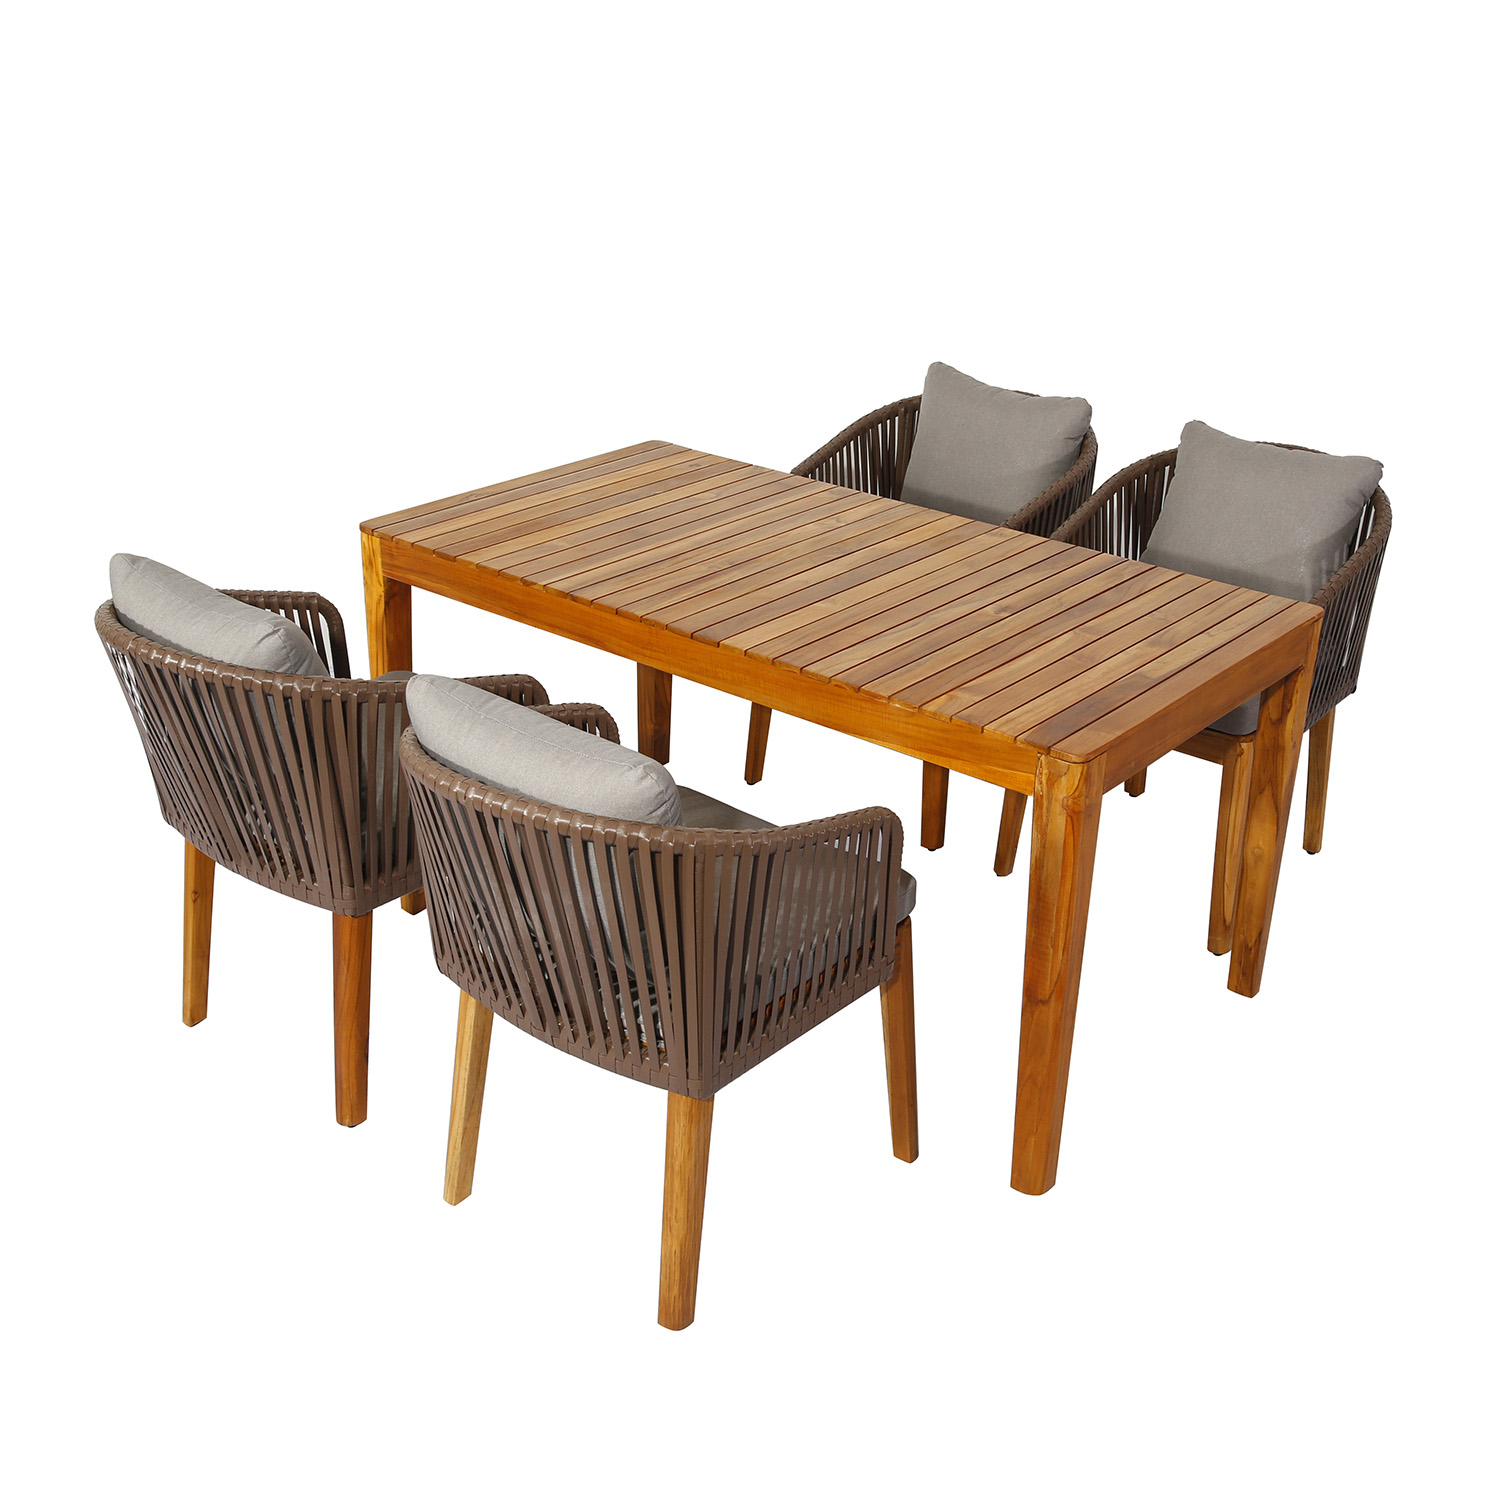 CZ003 Teakwood Garden Furniture Dining Set Outdoor Dining Table and Chair Set